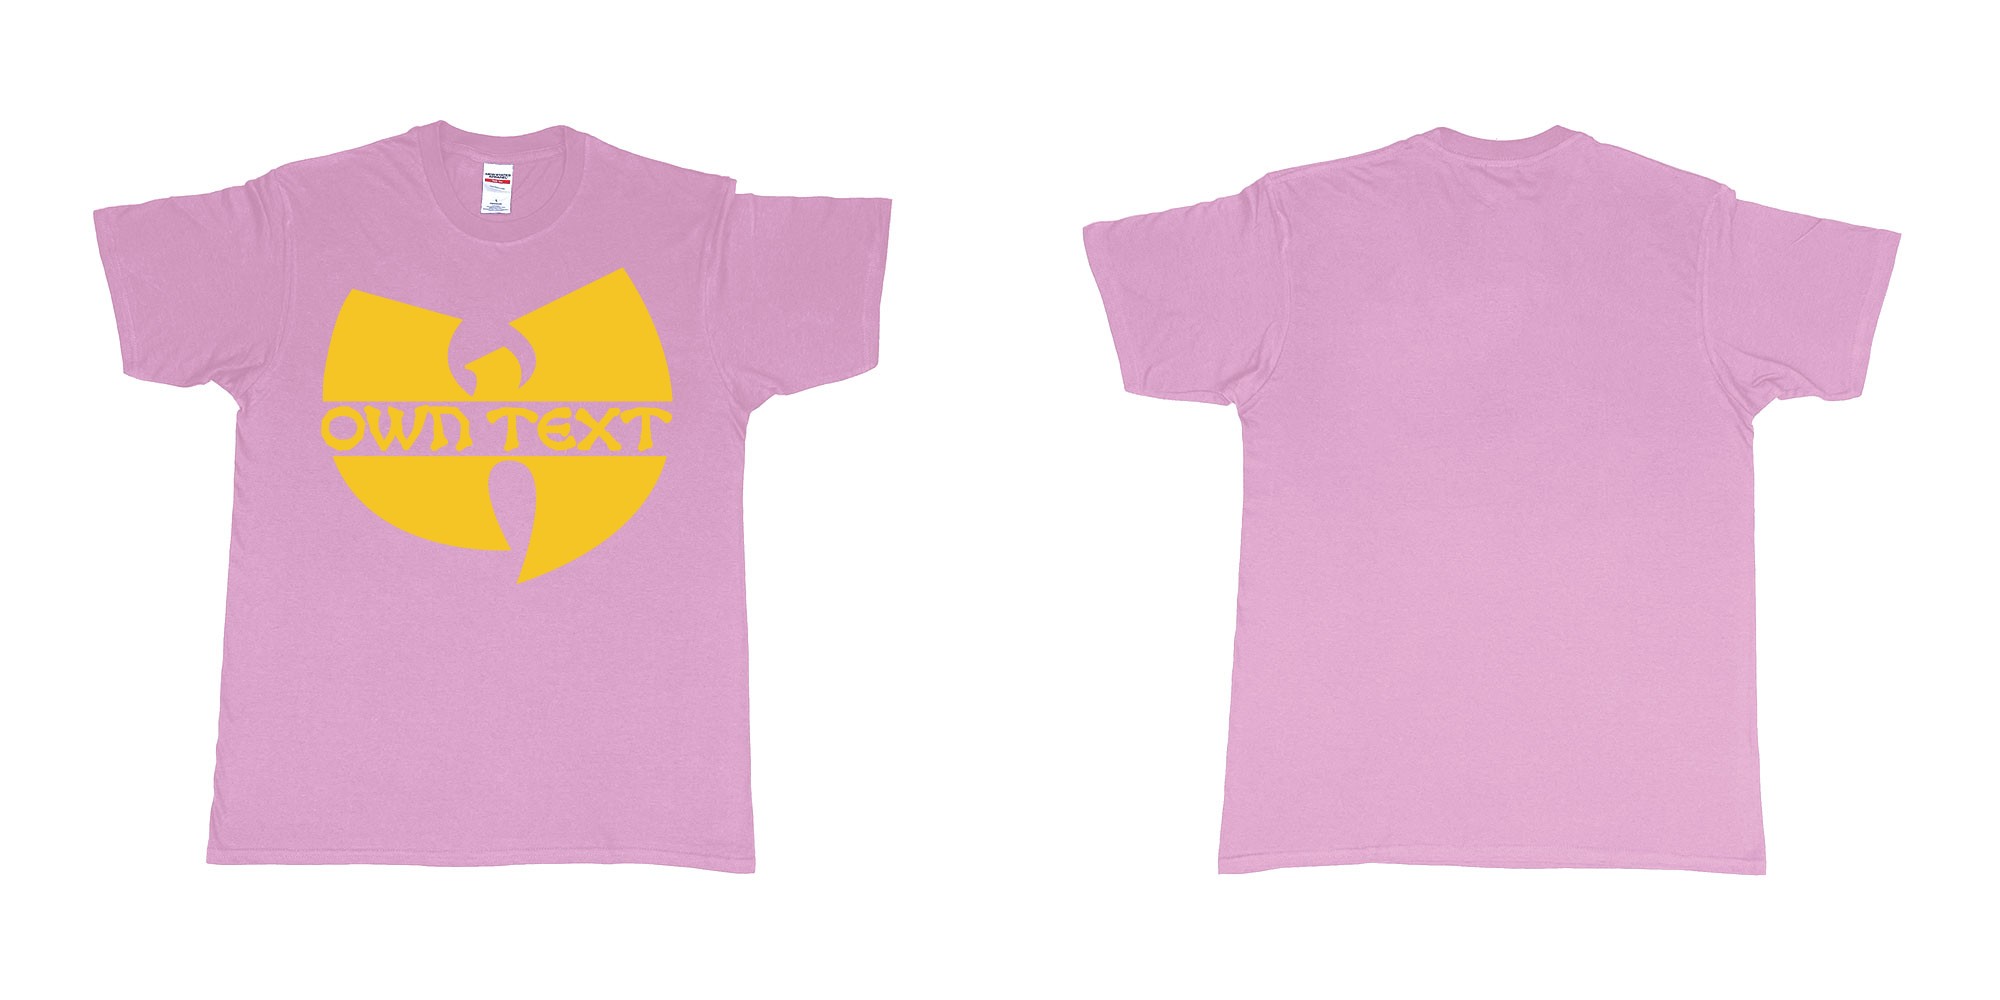 Custom tshirt design wu tang clan logo in fabric color light-pink choice your own text made in Bali by The Pirate Way